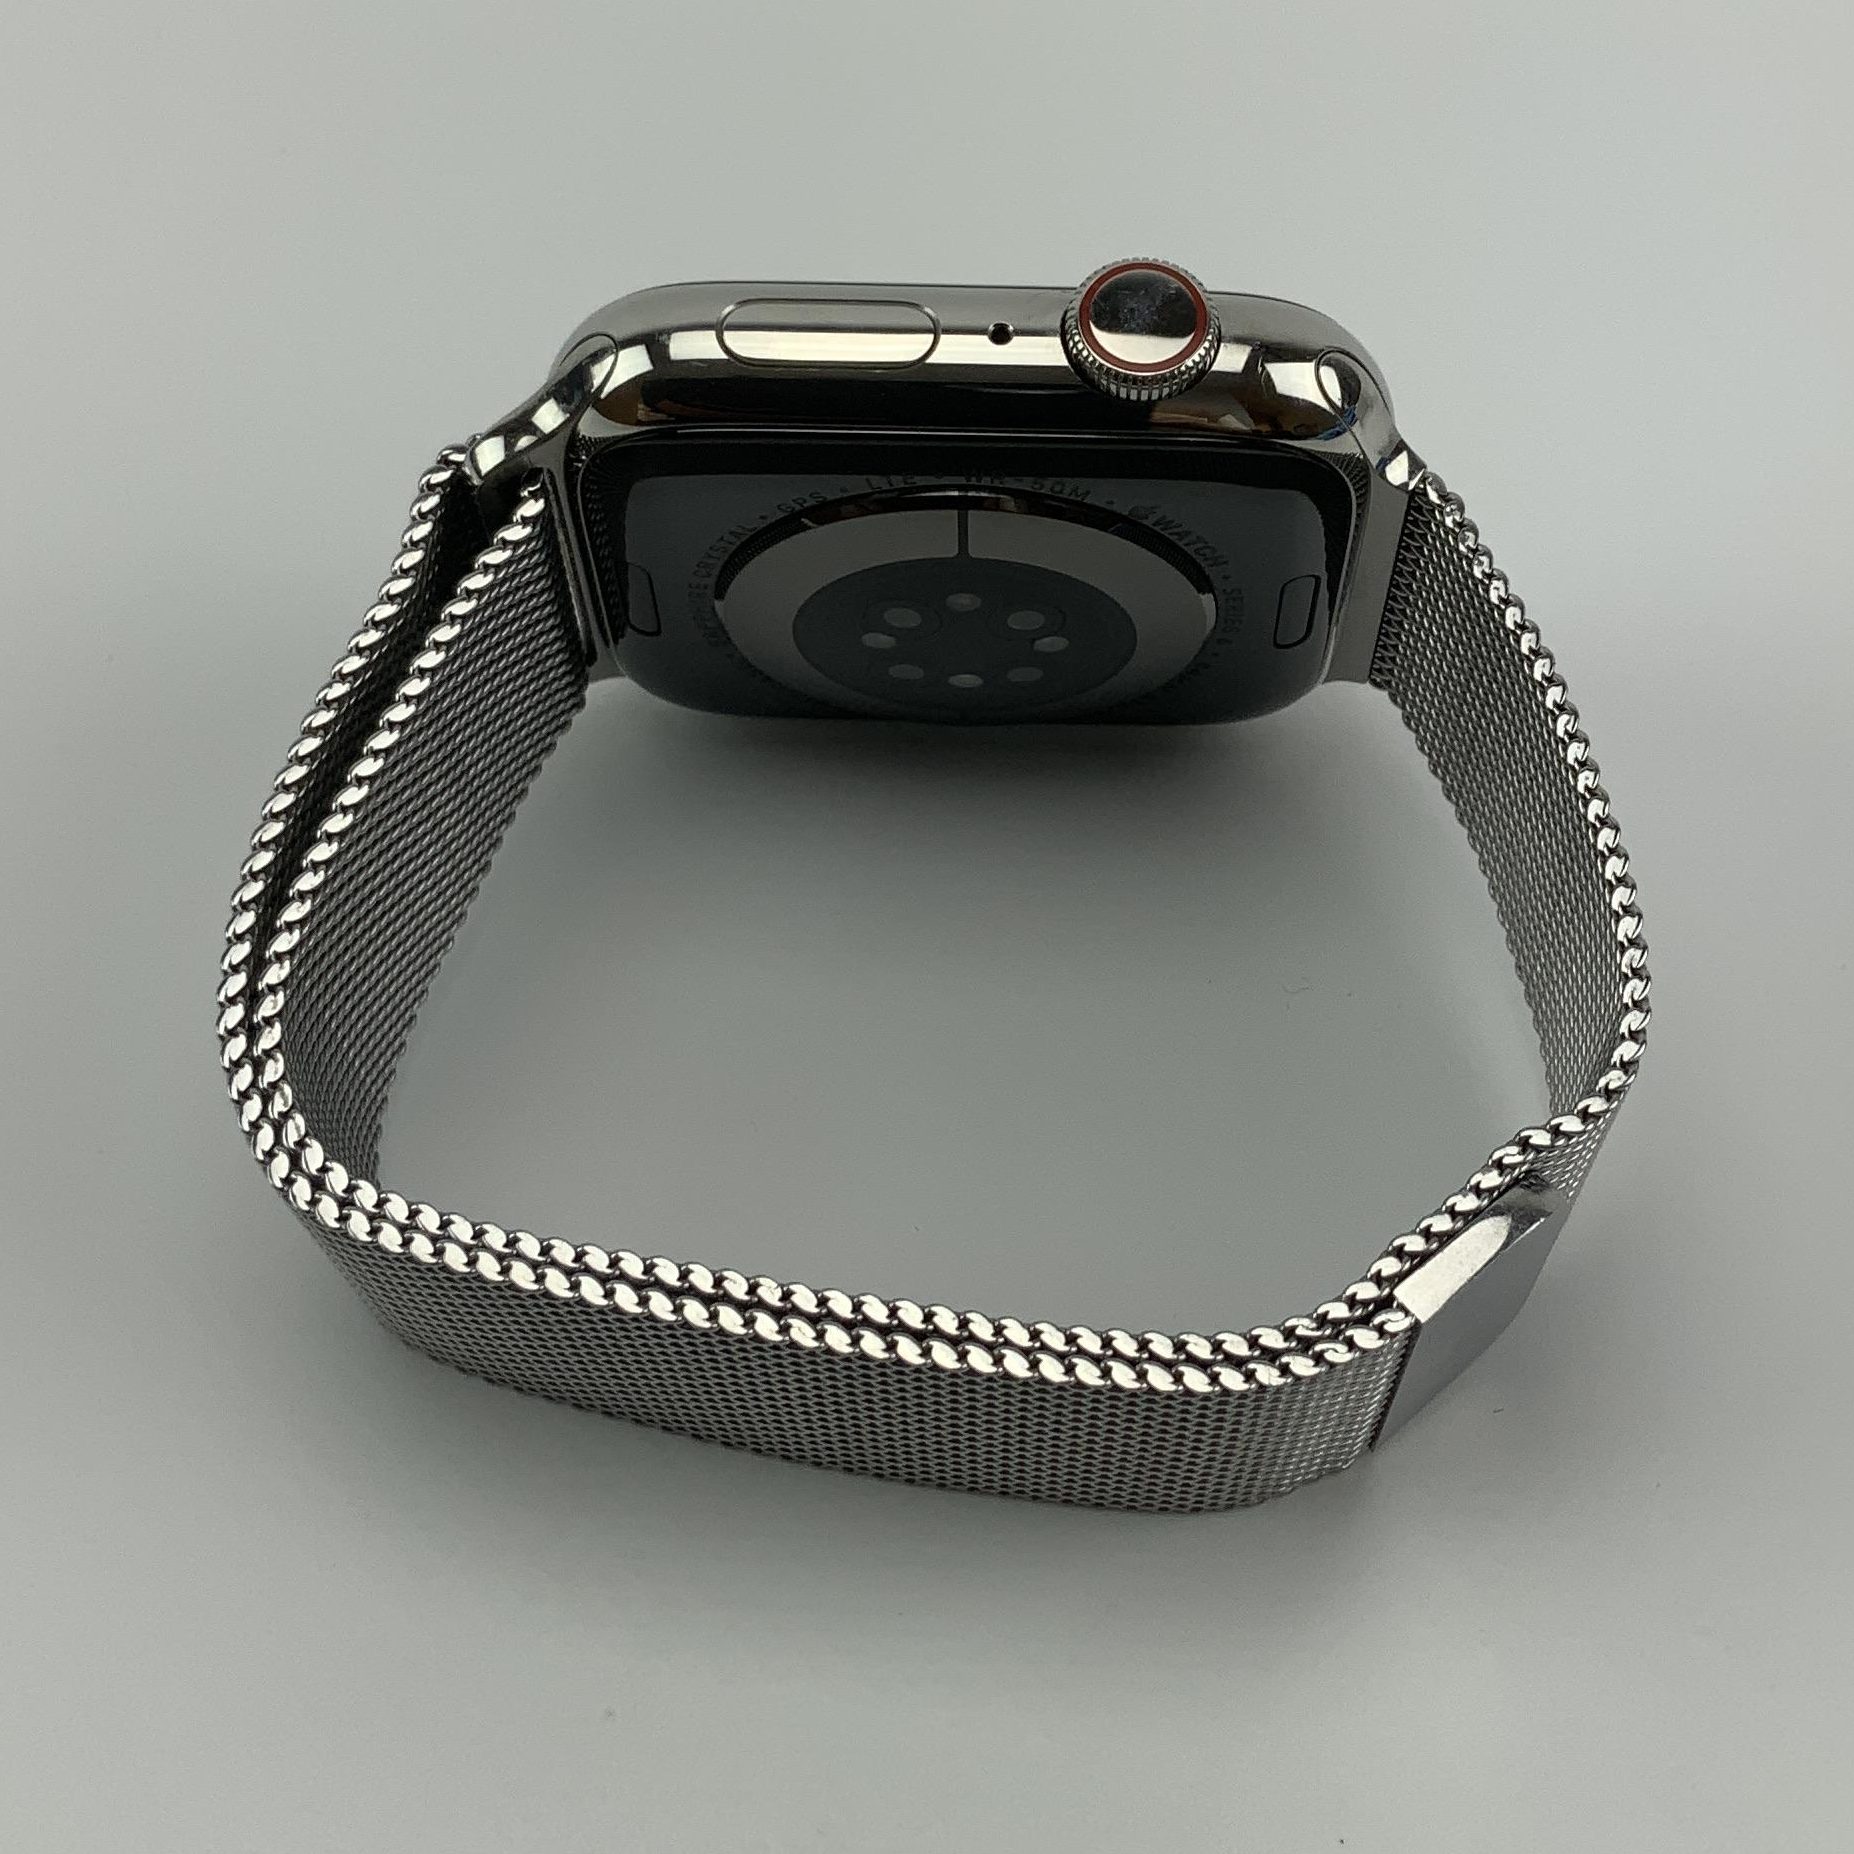 Watch Series 5 Steel Cellular (44mm), Silver, image 3